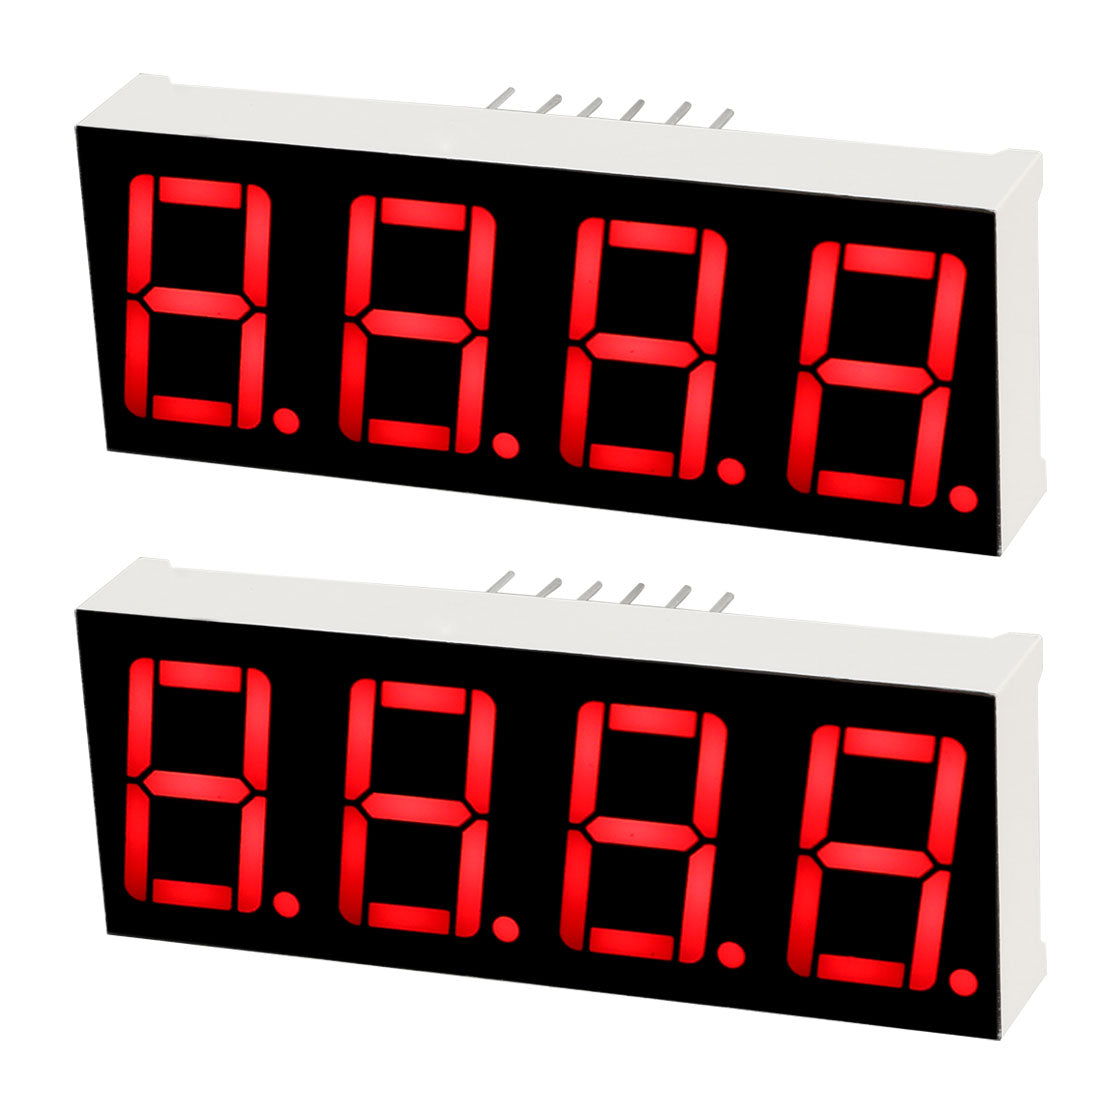 uxcell Uxcell Common Anode 12Pin 4 Bit 7 Segment 1.98 x 0.75 x 0.31 Inch 0.55" Red LED Display Digital Tube 2pcs